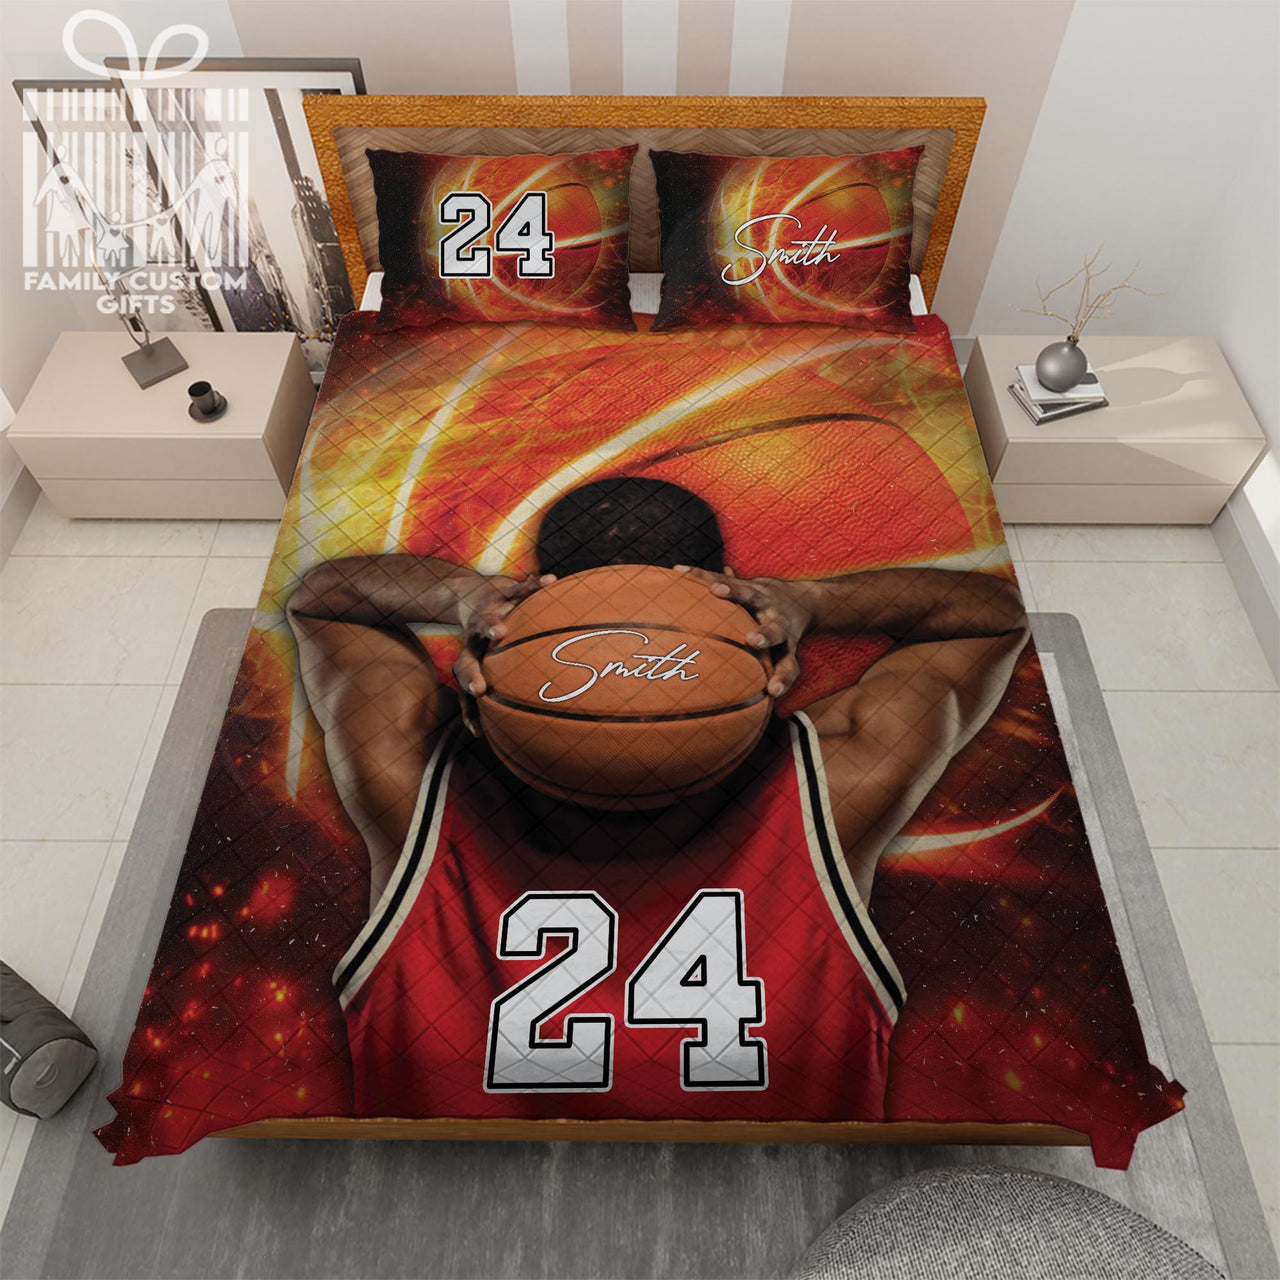 Custom Quilt Sets for Kids Teens Adult Basketball Player Personalized Quilt Bedding for Boy Men